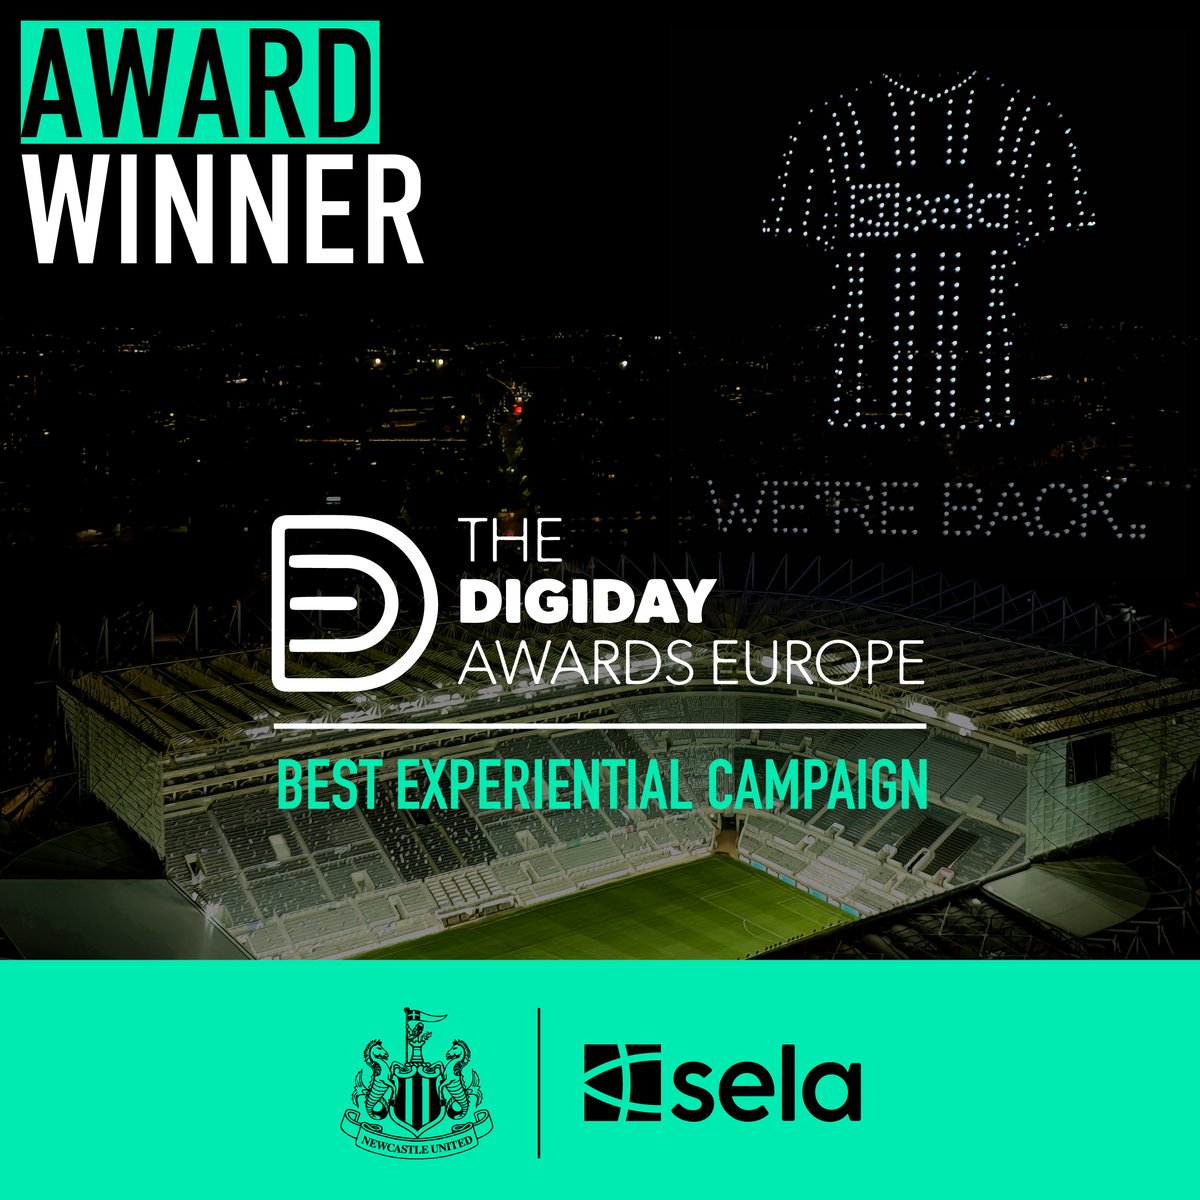 We're thrilled to announce that our “We're Back” activation has won the Best Experiential Campaign Award at the Digiday Awards Europe. A big thank you to everyone involved! 

#Sela #NUFC #SpectacularEveryday